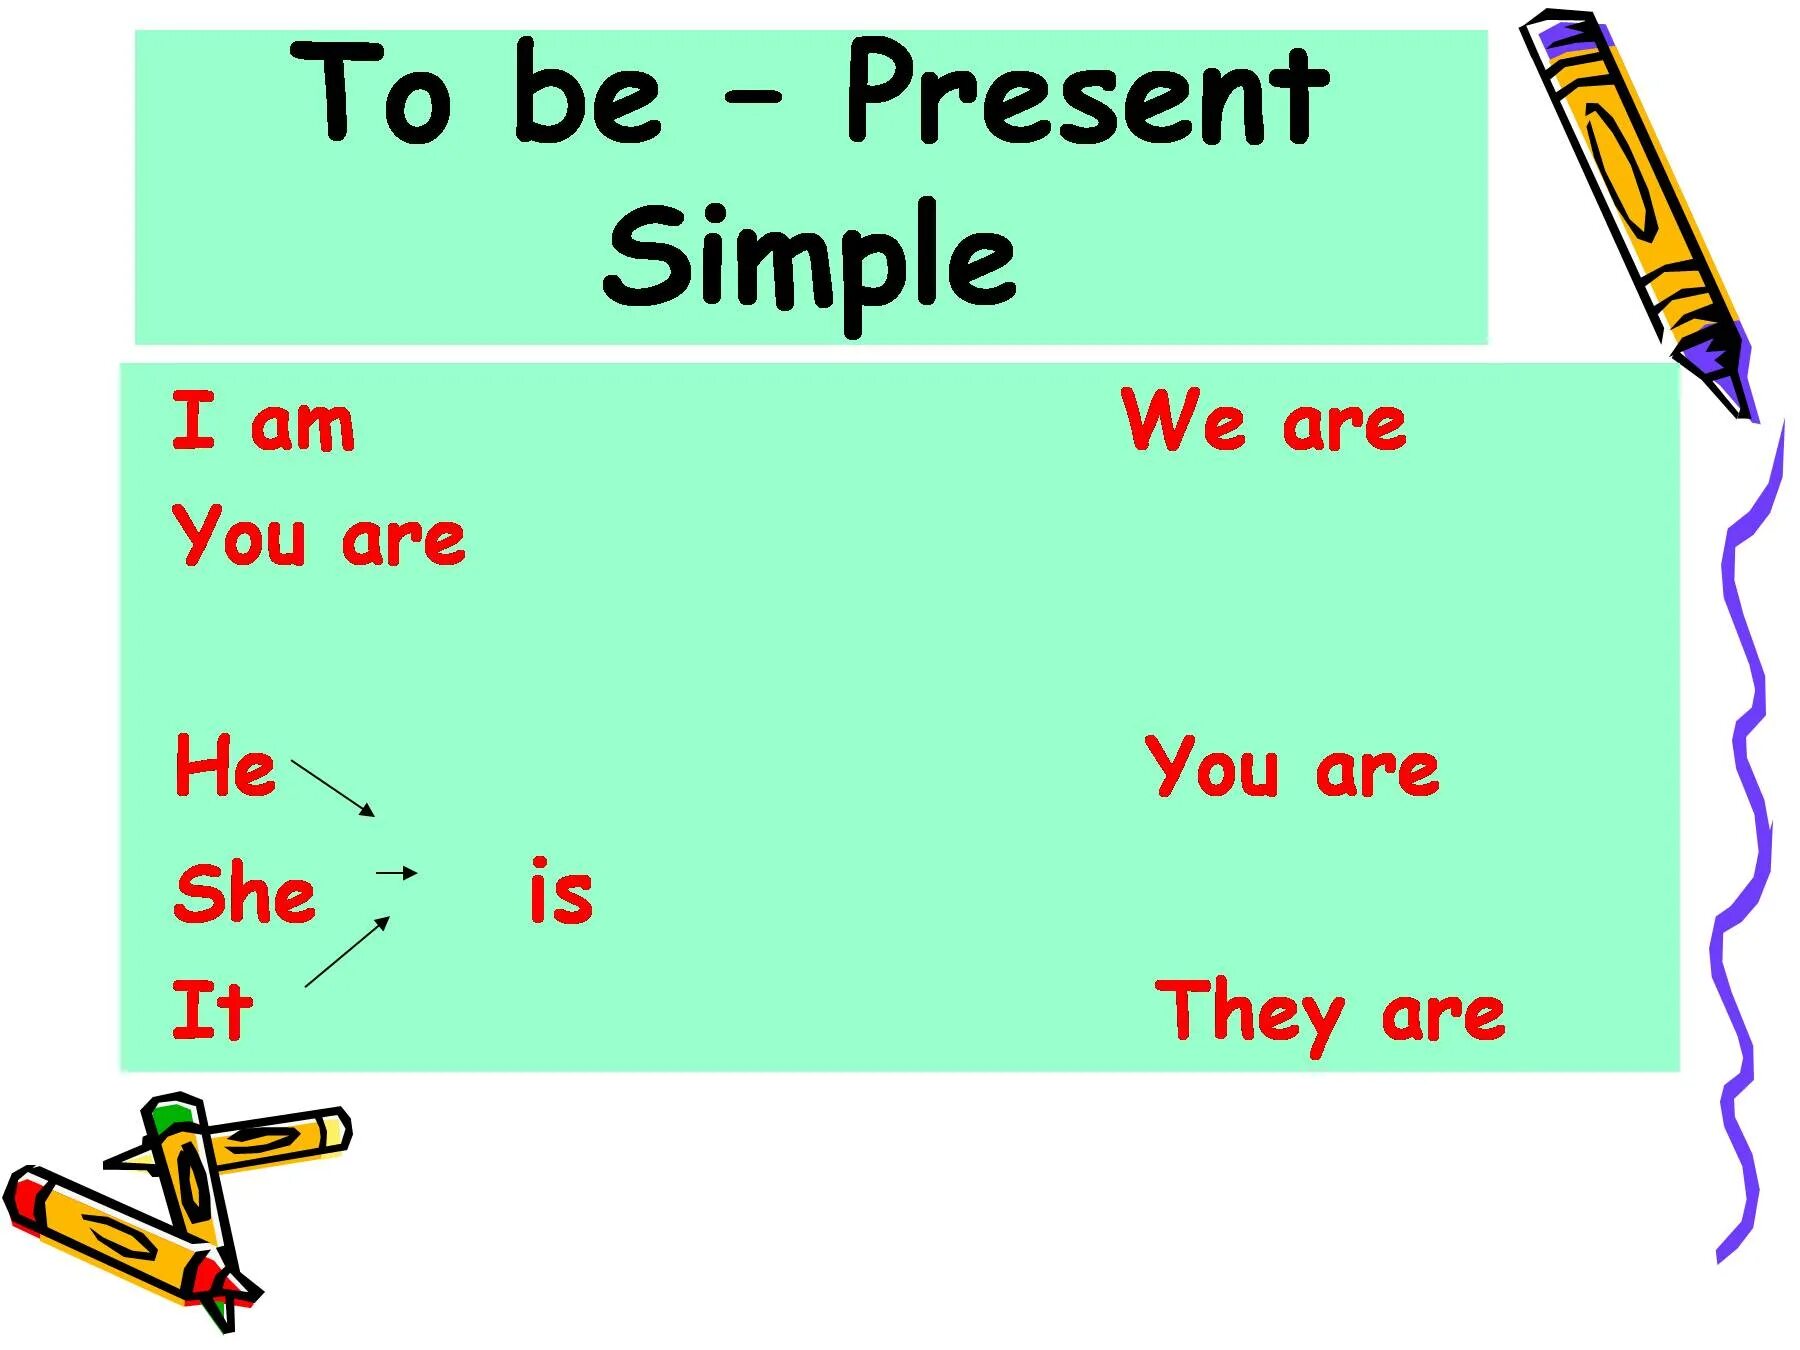 Present simple to be правила. To be present simple. Спряжение глагола to be в present simple. Be в презент Симпл. Were also present